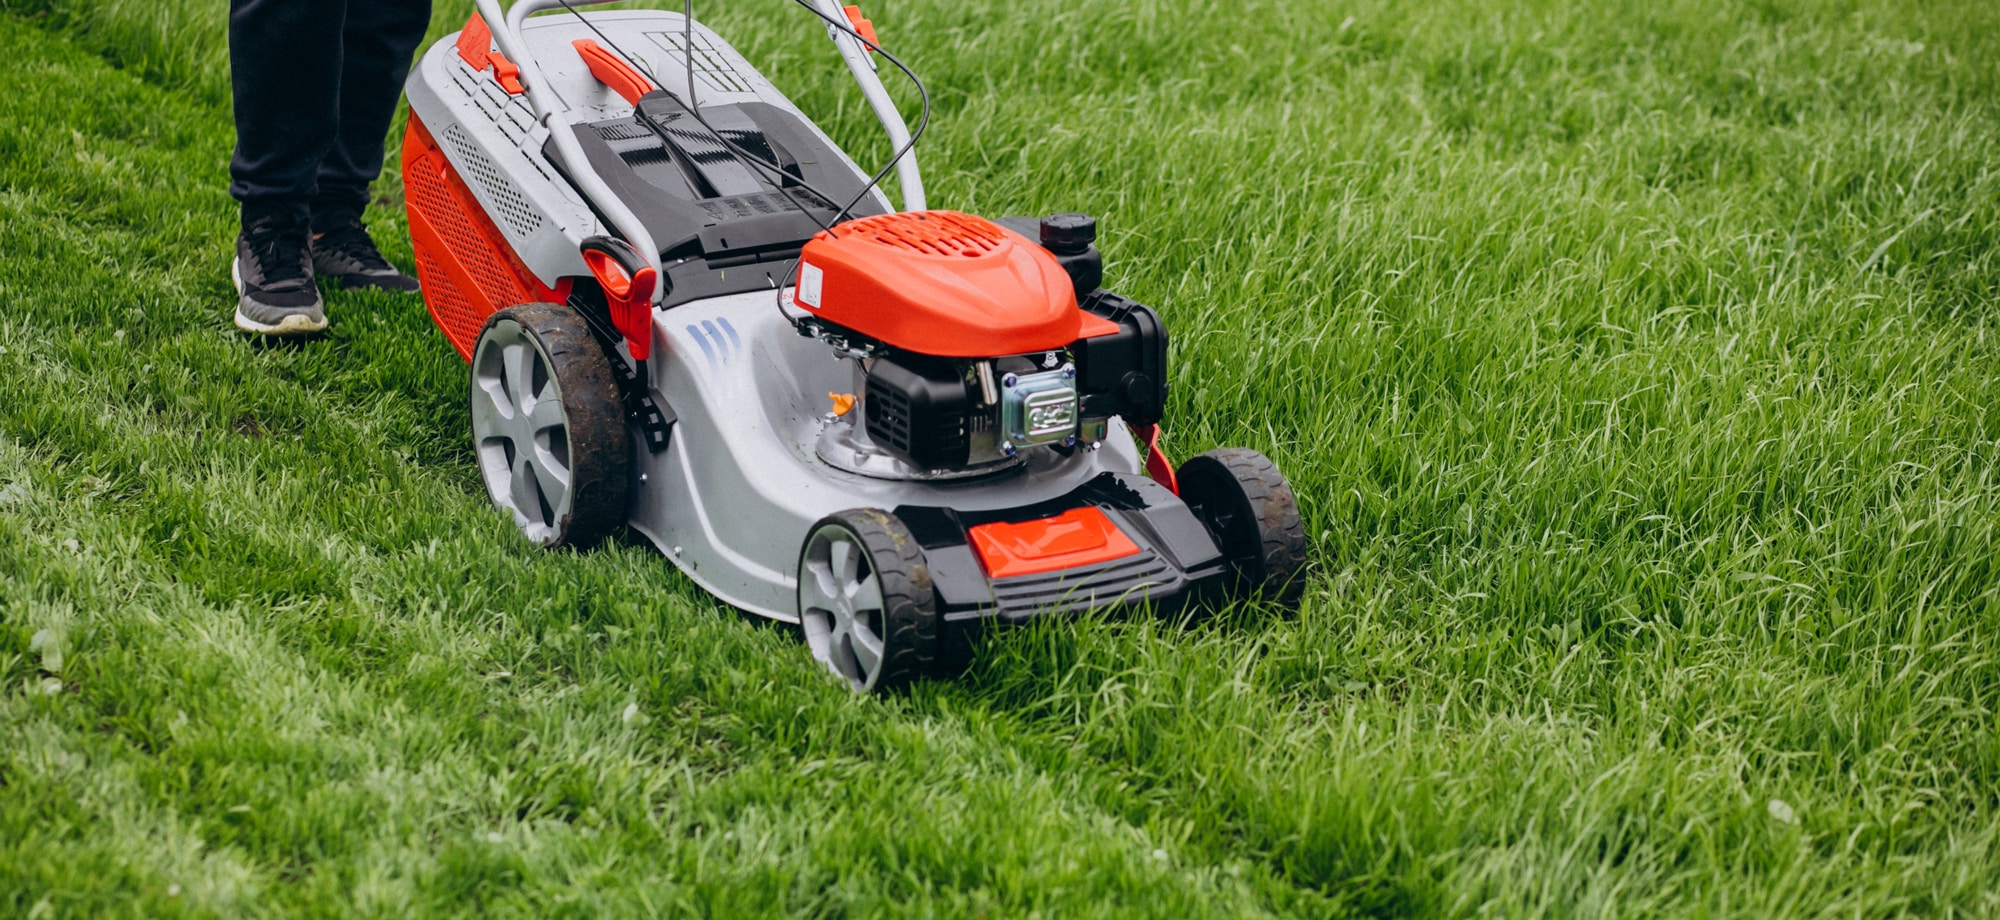 A Scott's Lawn Care professional uses a push mower to trim grass.